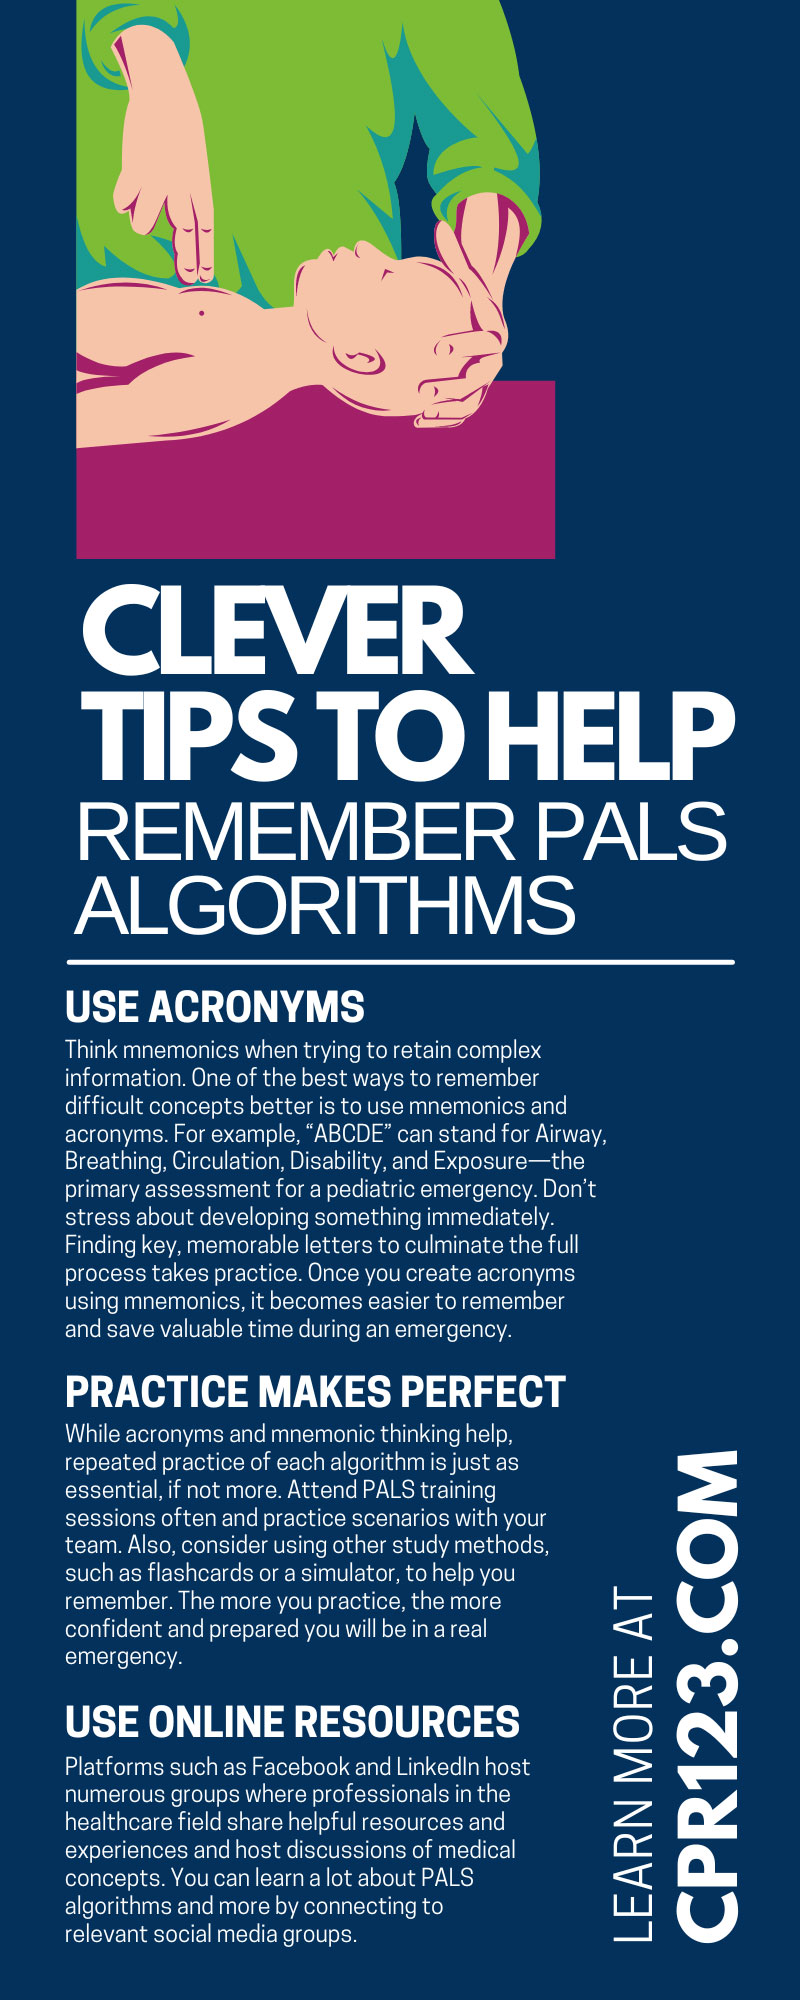 Clever Tips To Help Remember PALS Algorithms
